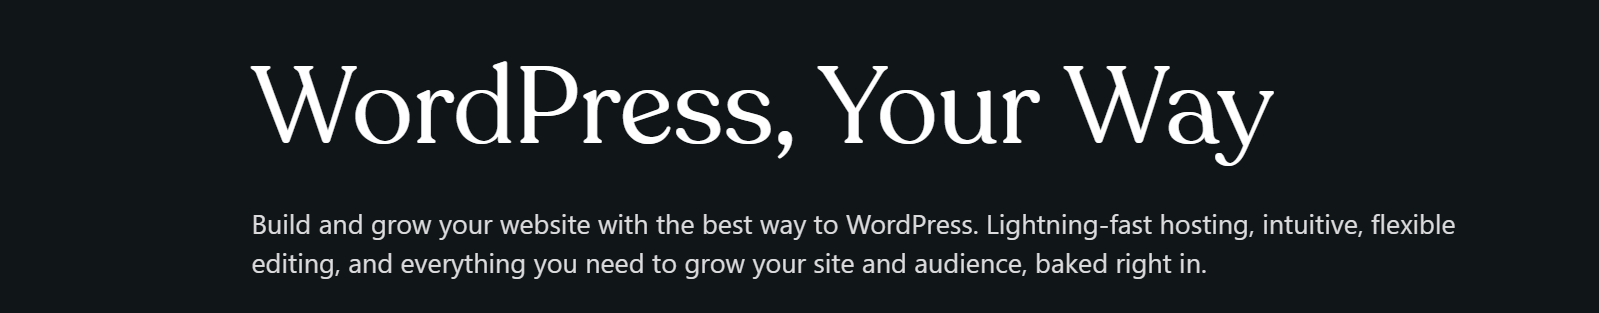 Image showing WordPress as a management system